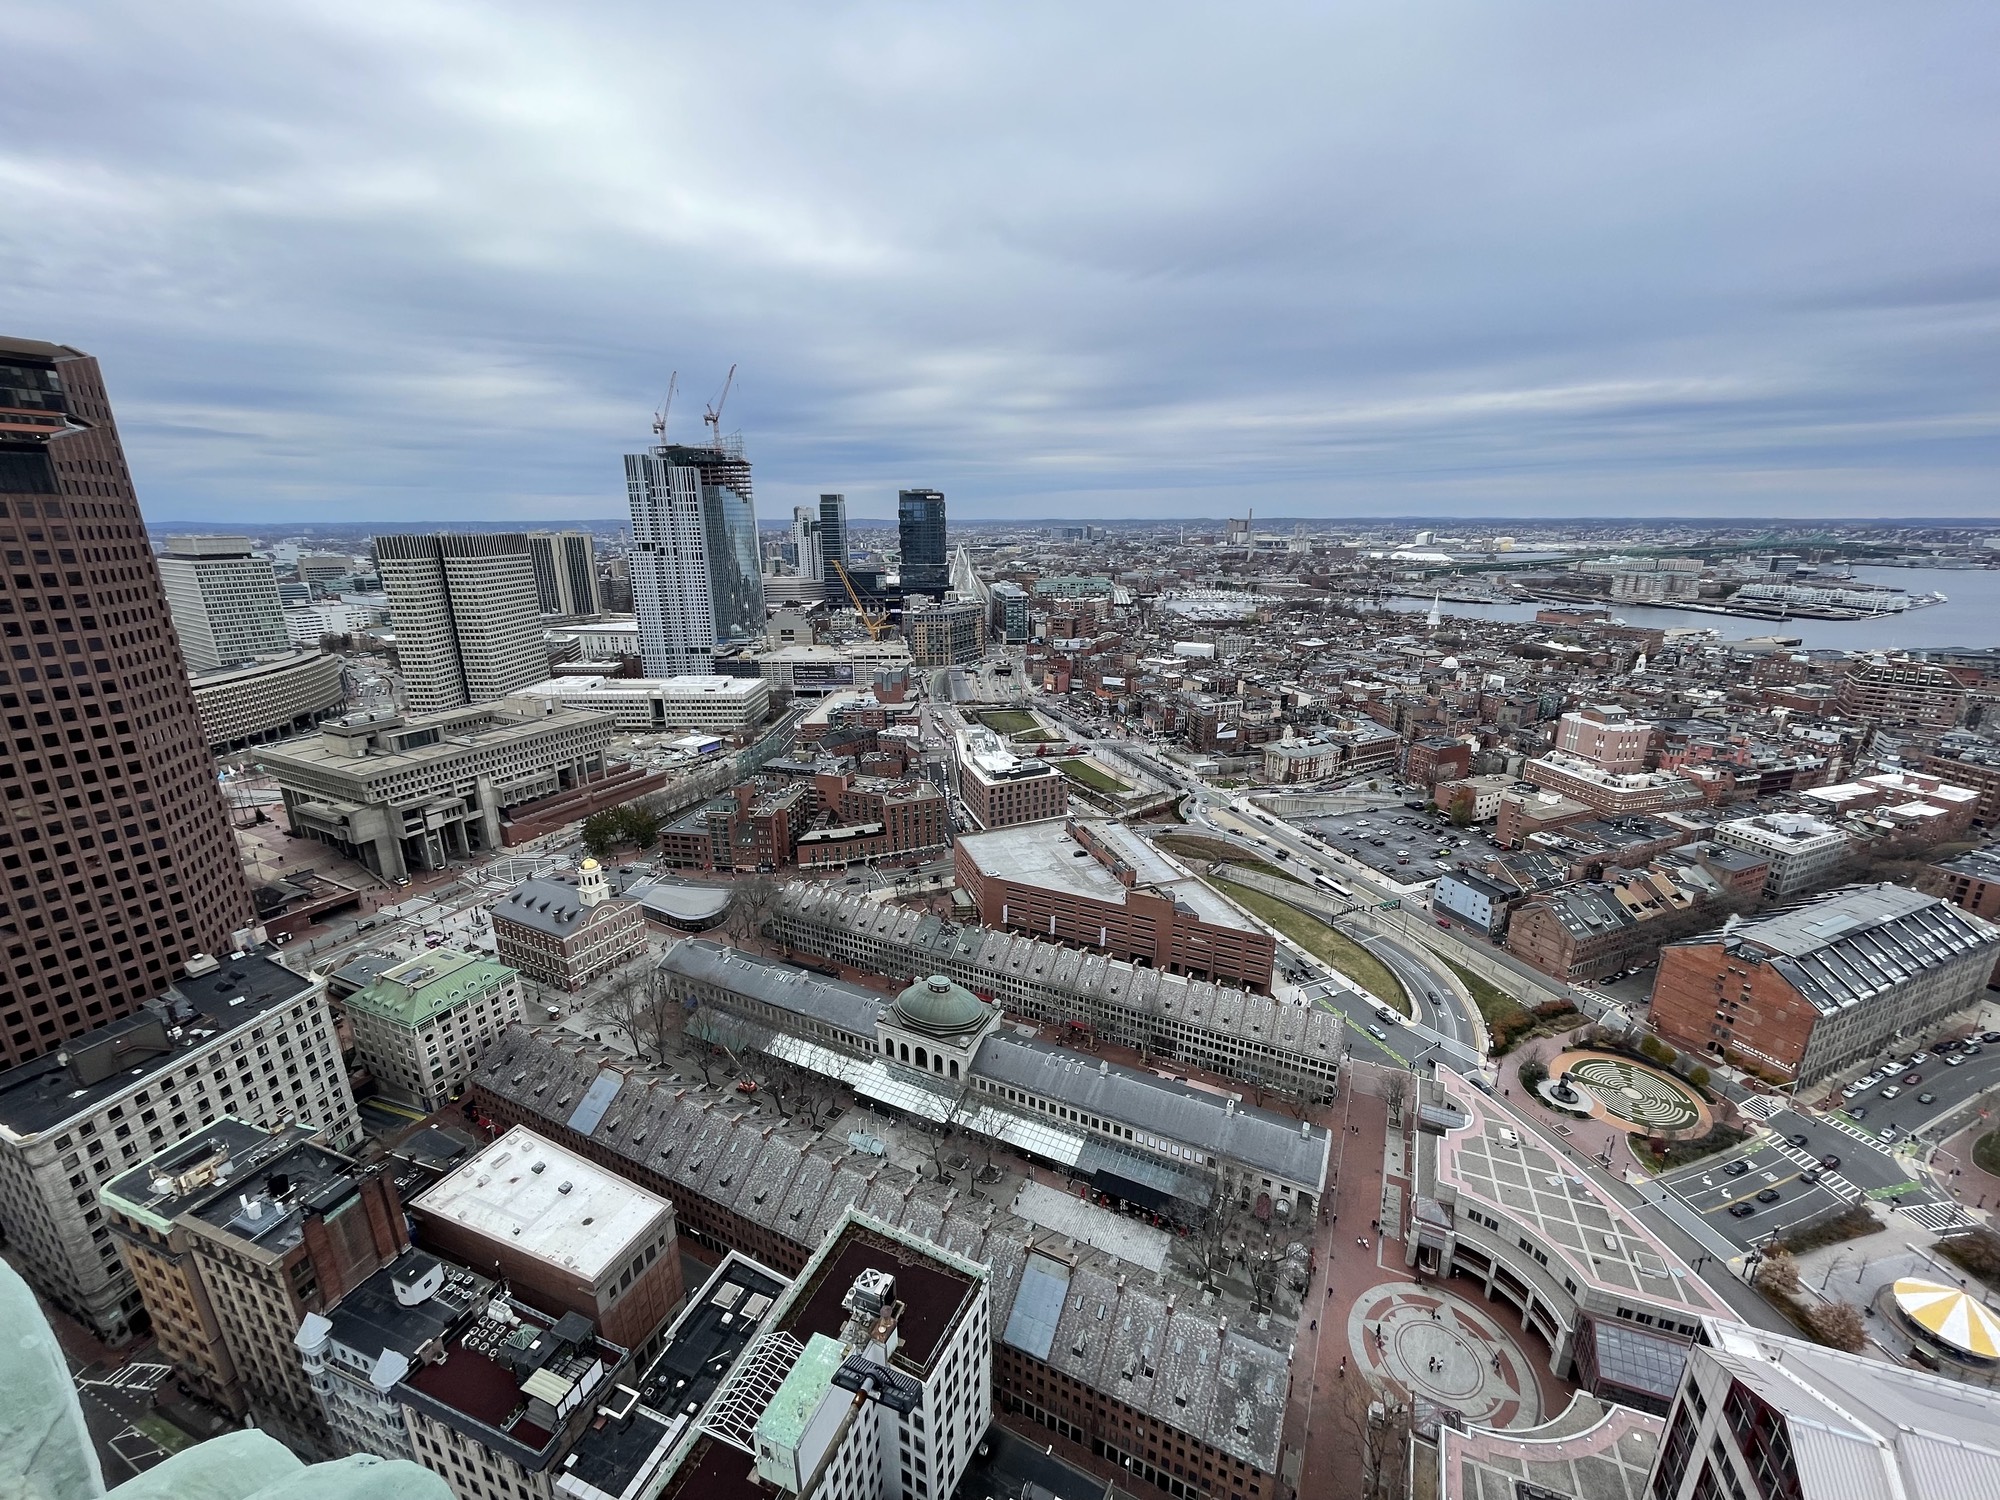 Government Center on the left, North End to the right, Faneuil Hall and Marketplace Center below